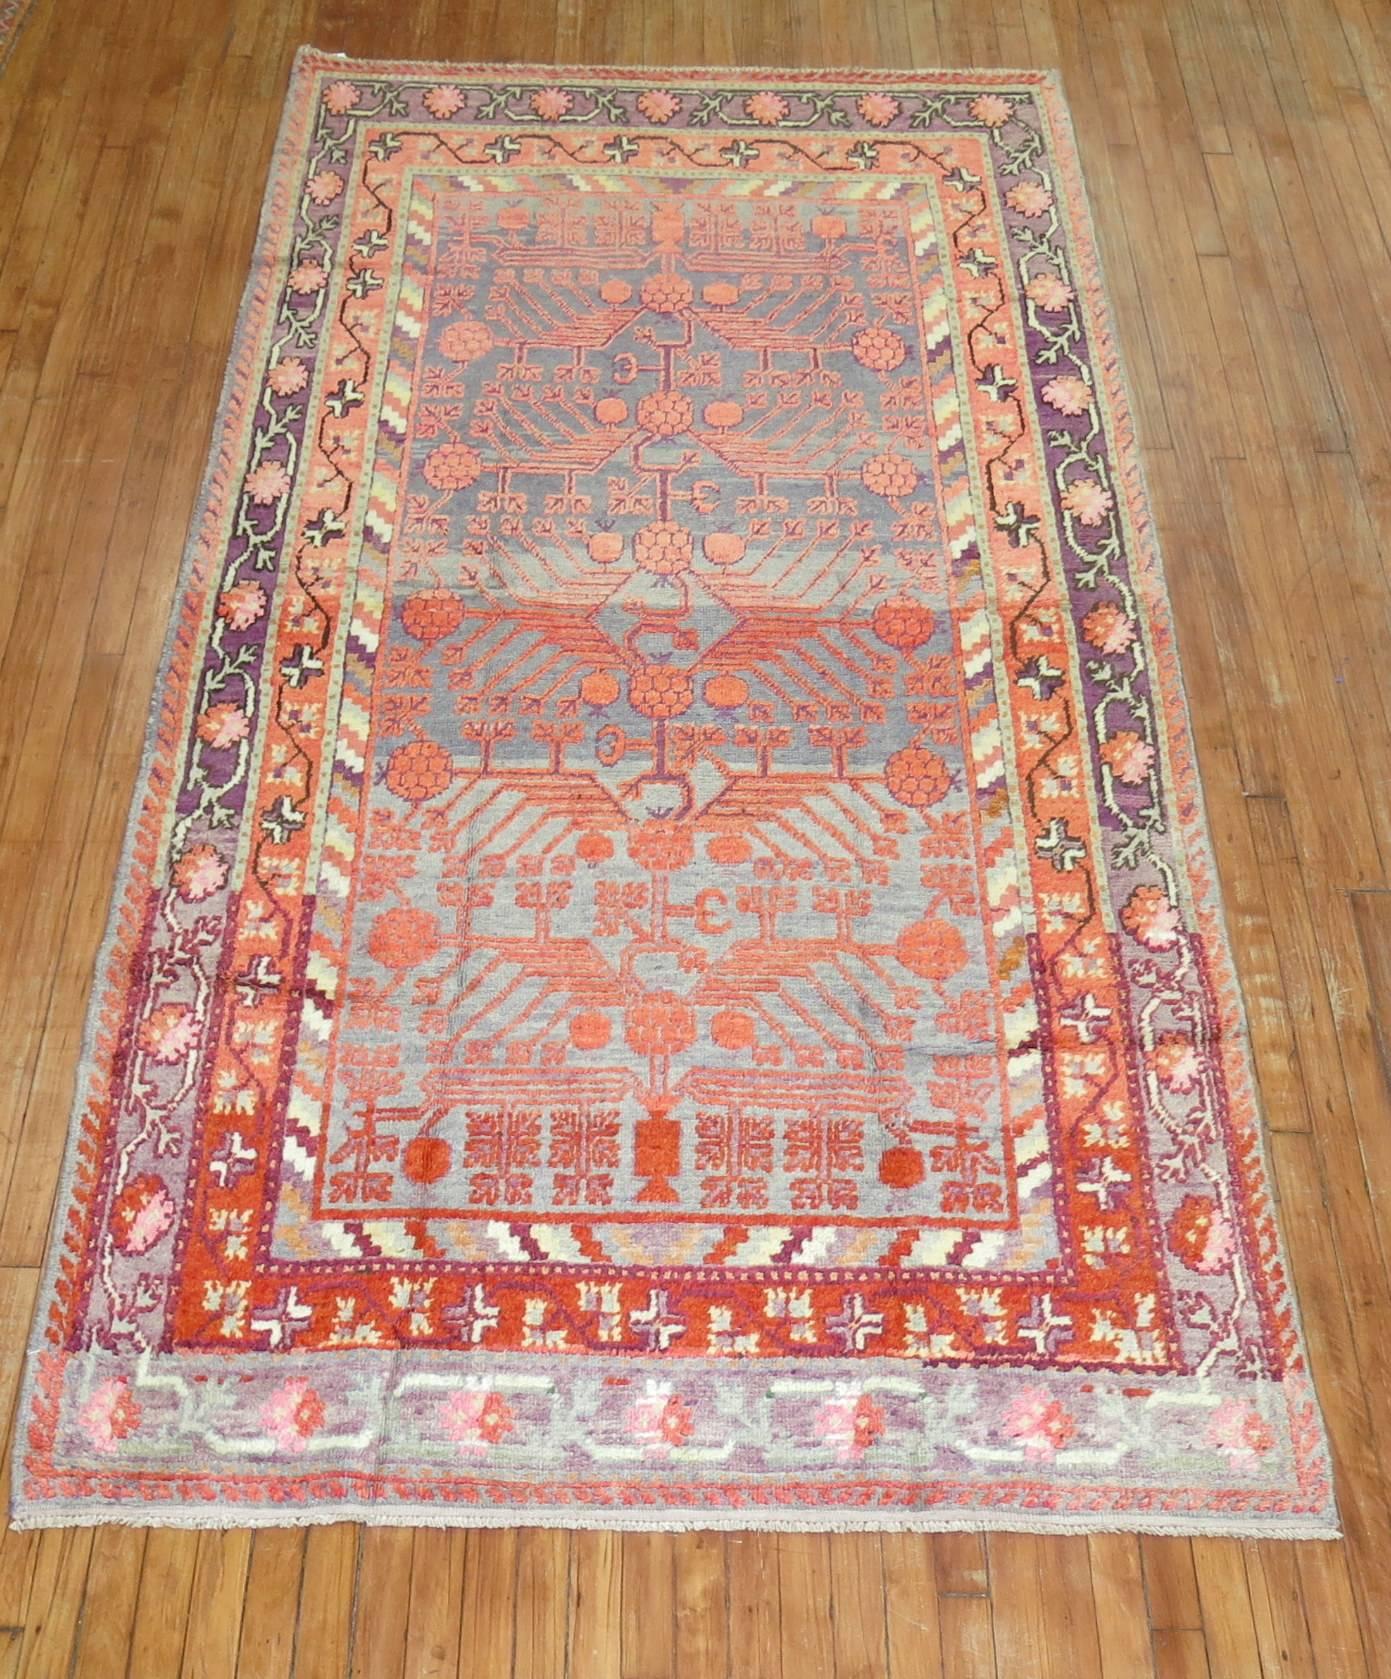 Hand-Woven Early 20th Century Khotan Wool Gray Field Antique Pomegranate Rug For Sale